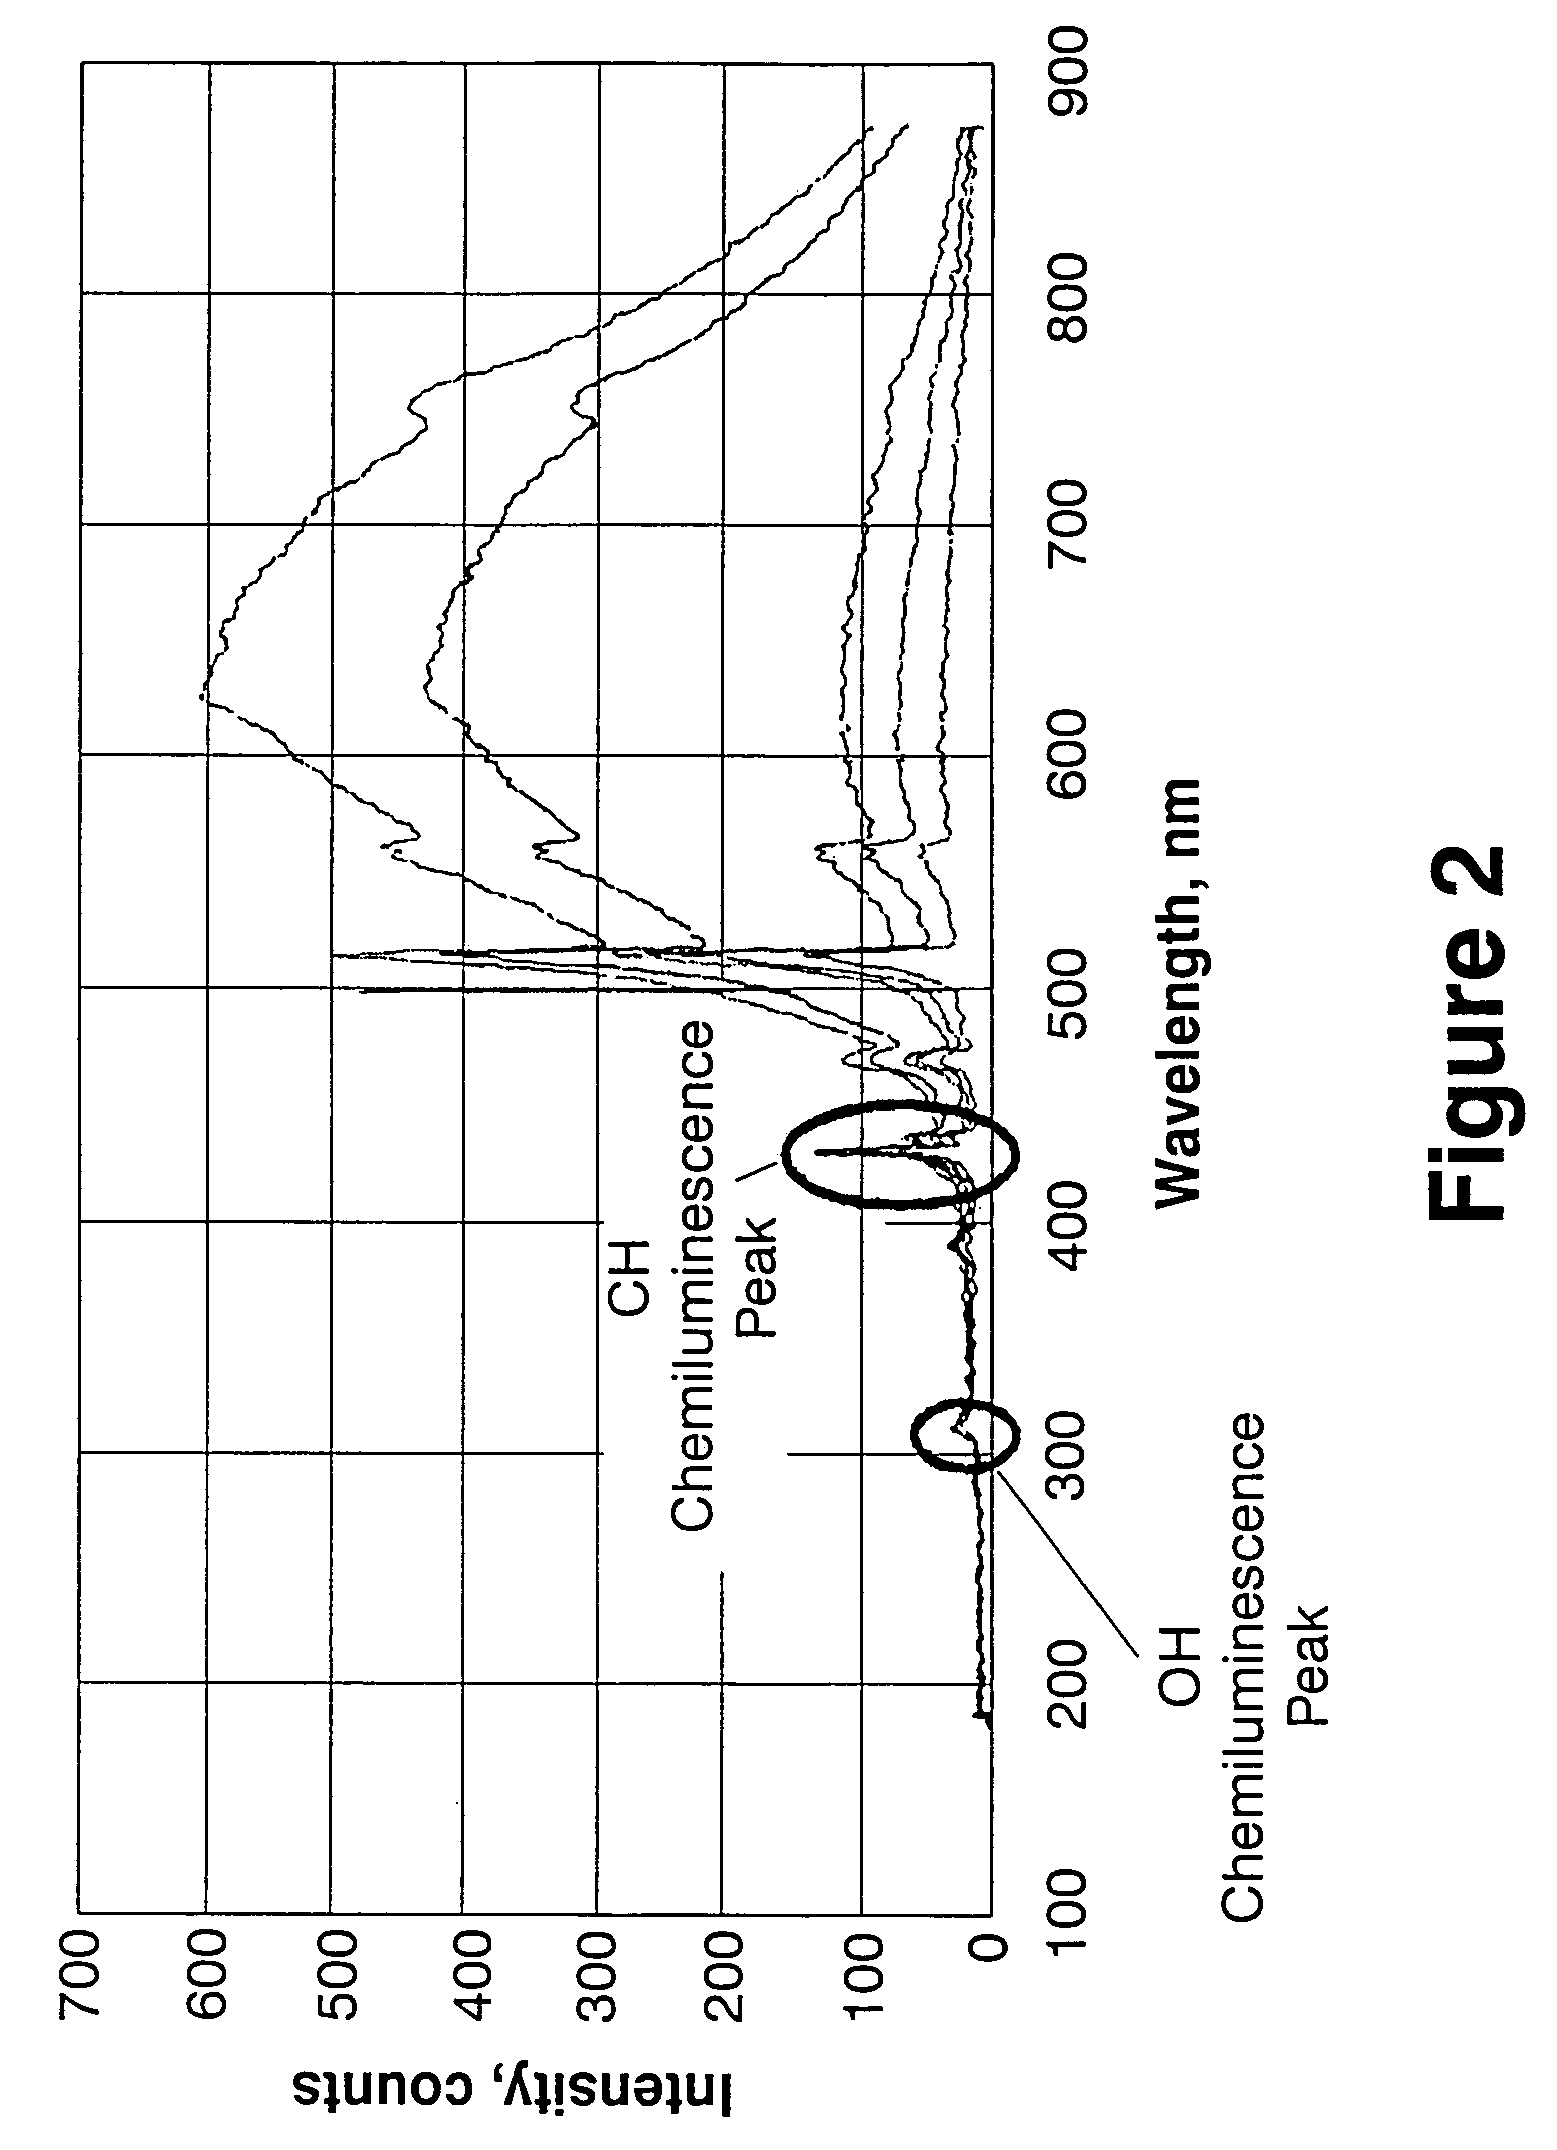 Apparatus for observing combustion conditions in a gas turbine engine